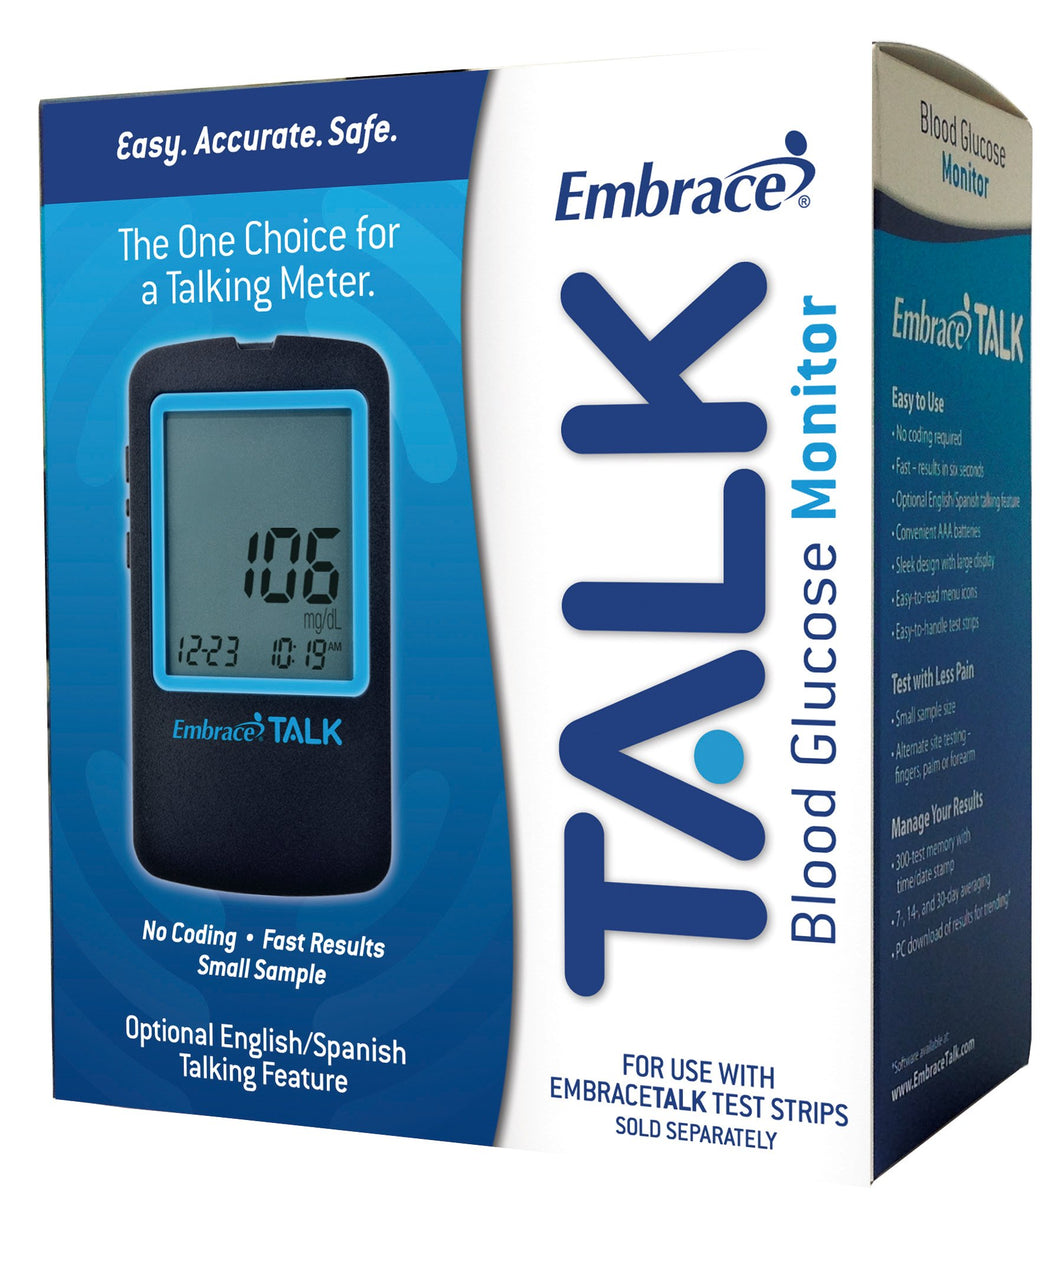 Blood Glucose Meter Embrace® 6 Second Results Stores Up To 300 Results with Date and Time No Coding Required